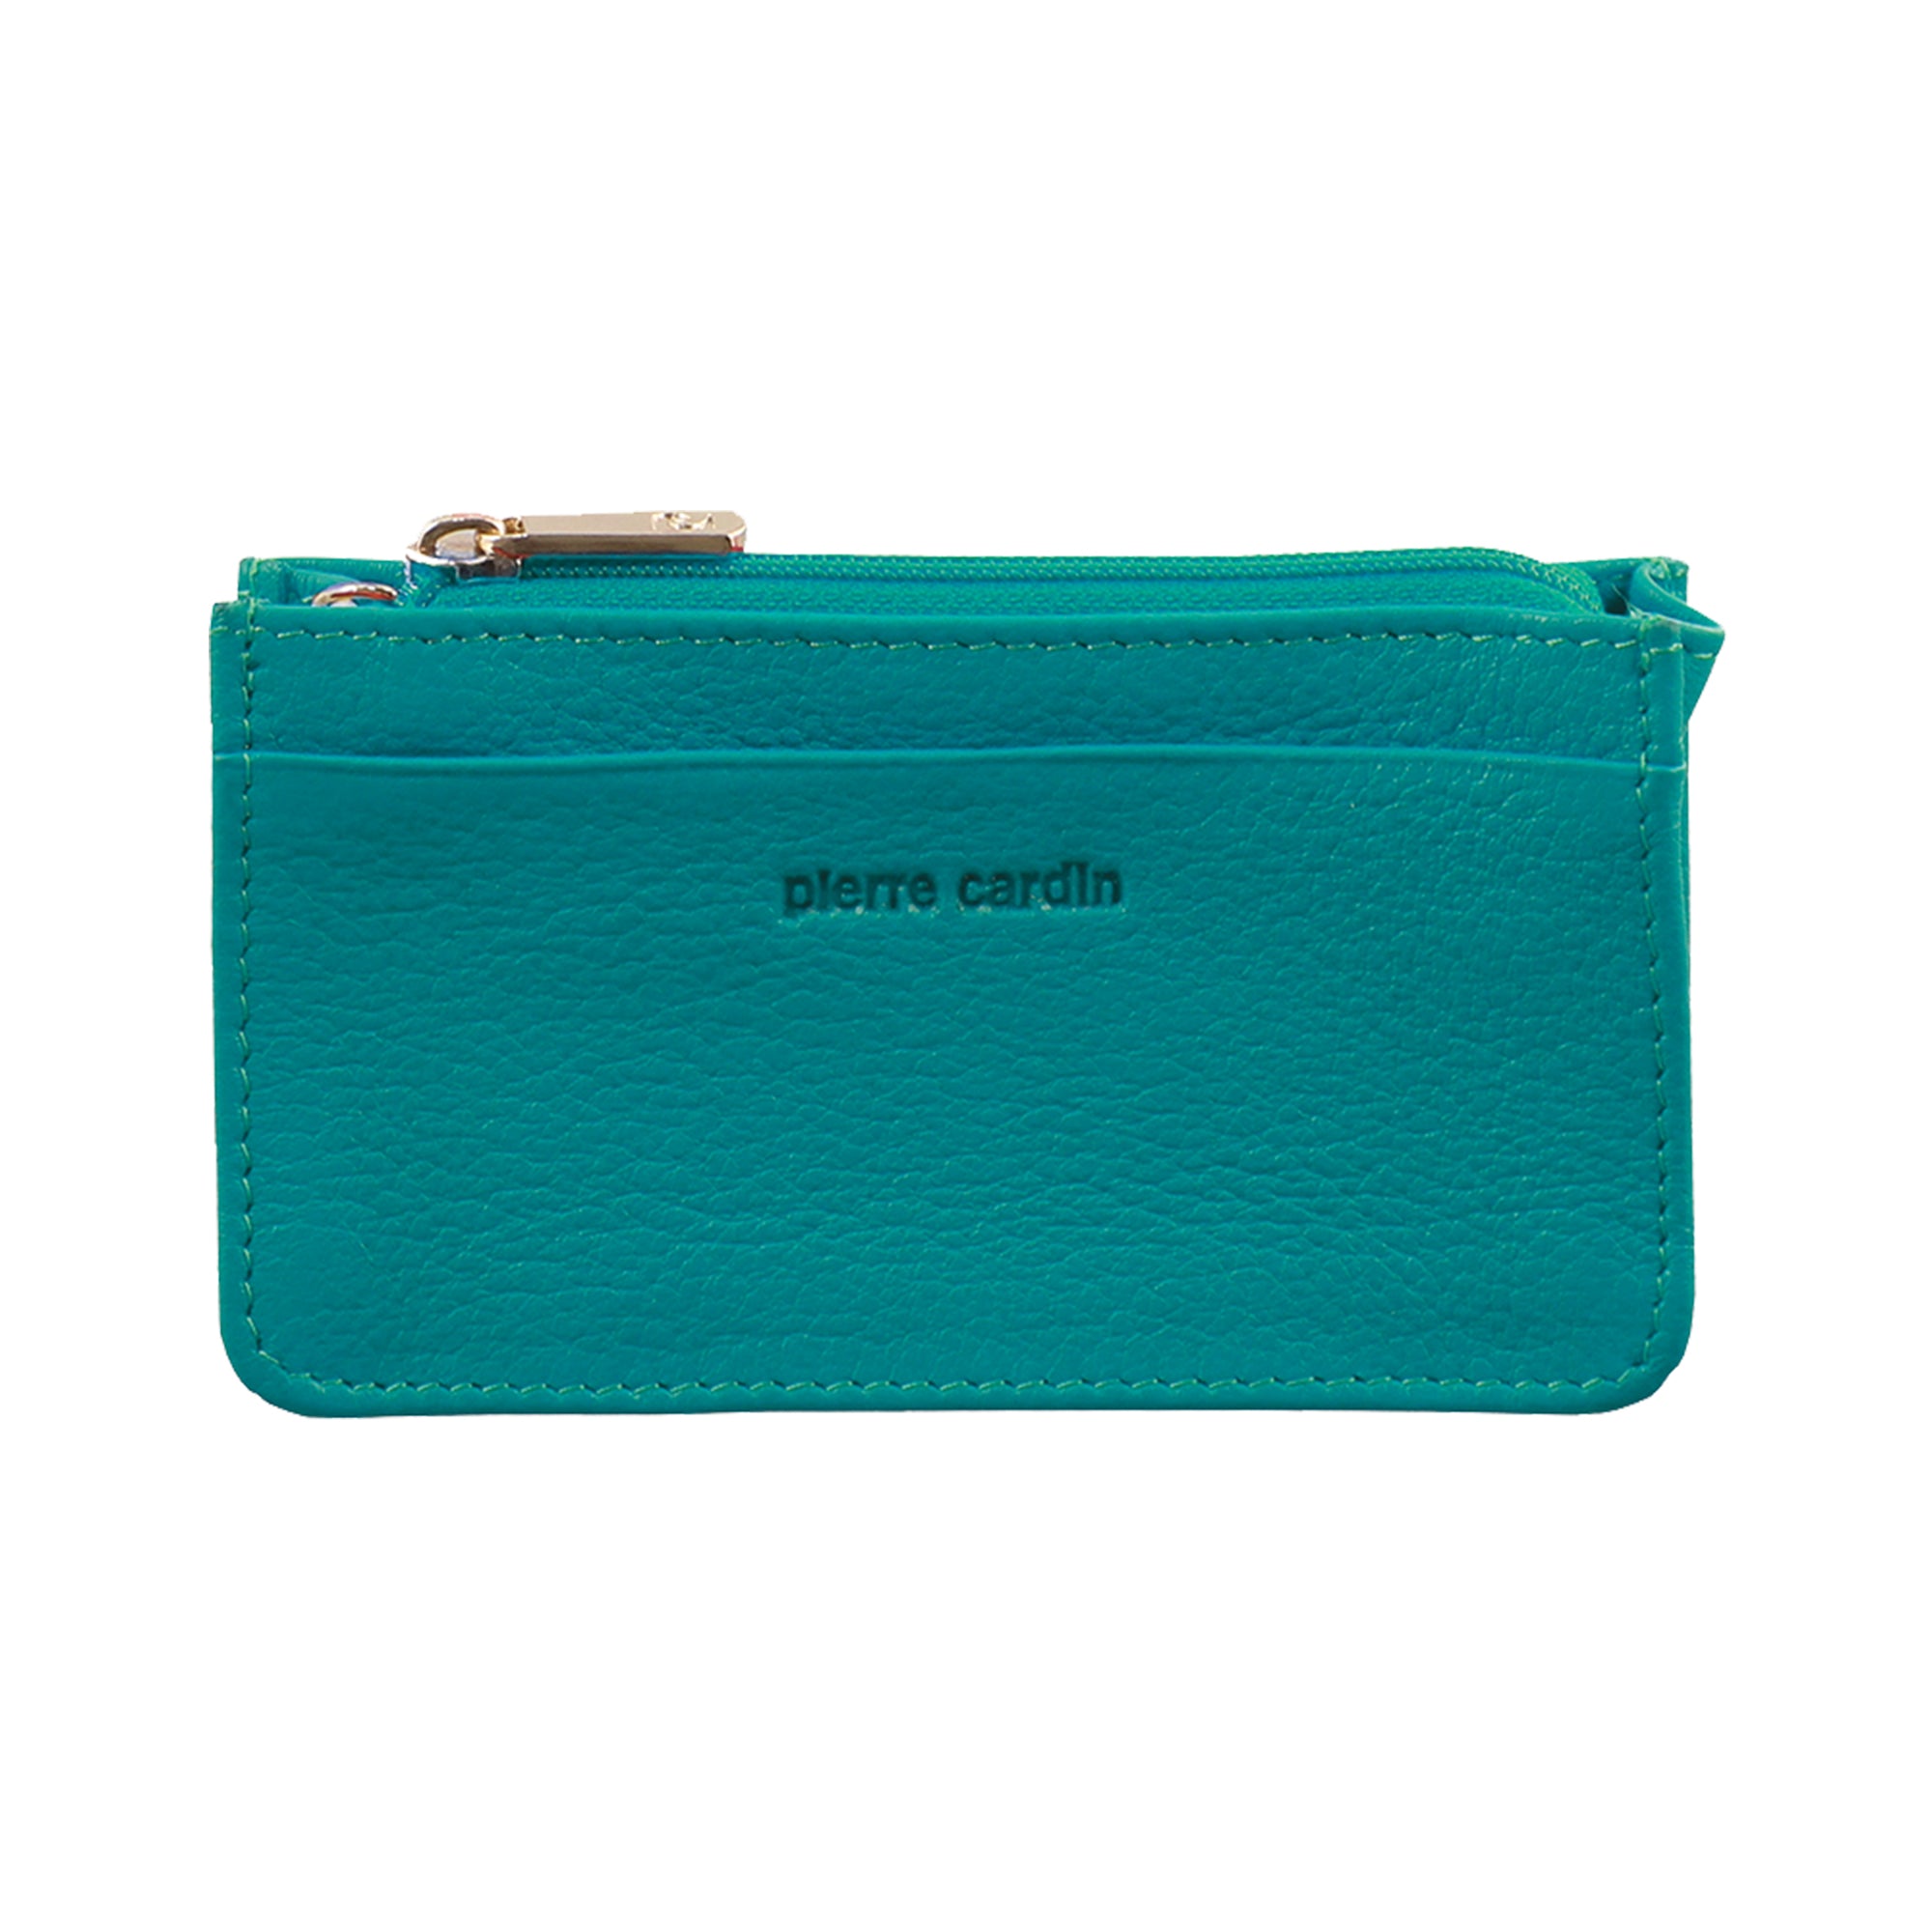 Pierre Cardin Coin Purse with Keyring in Aqua